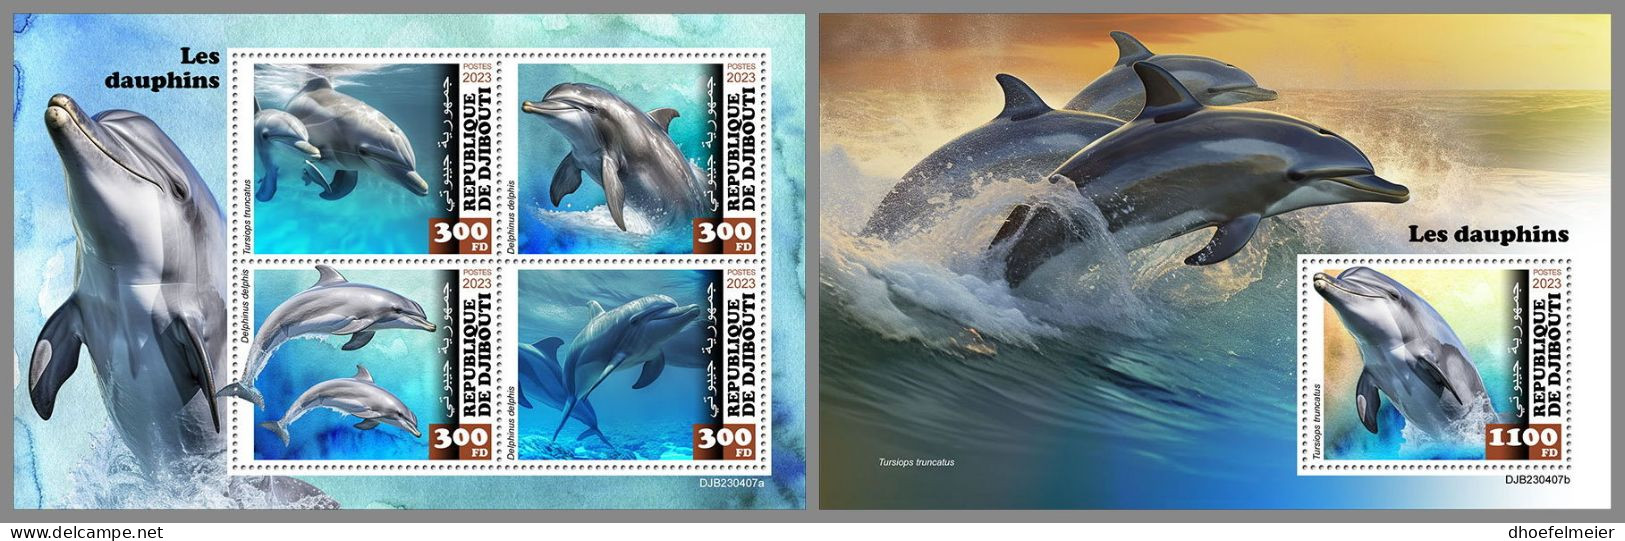 DJIBOUTI 2023 MNH Dolphins Delphine M/S+S/S – OFFICIAL ISSUE – DHQ2420 - Dolphins